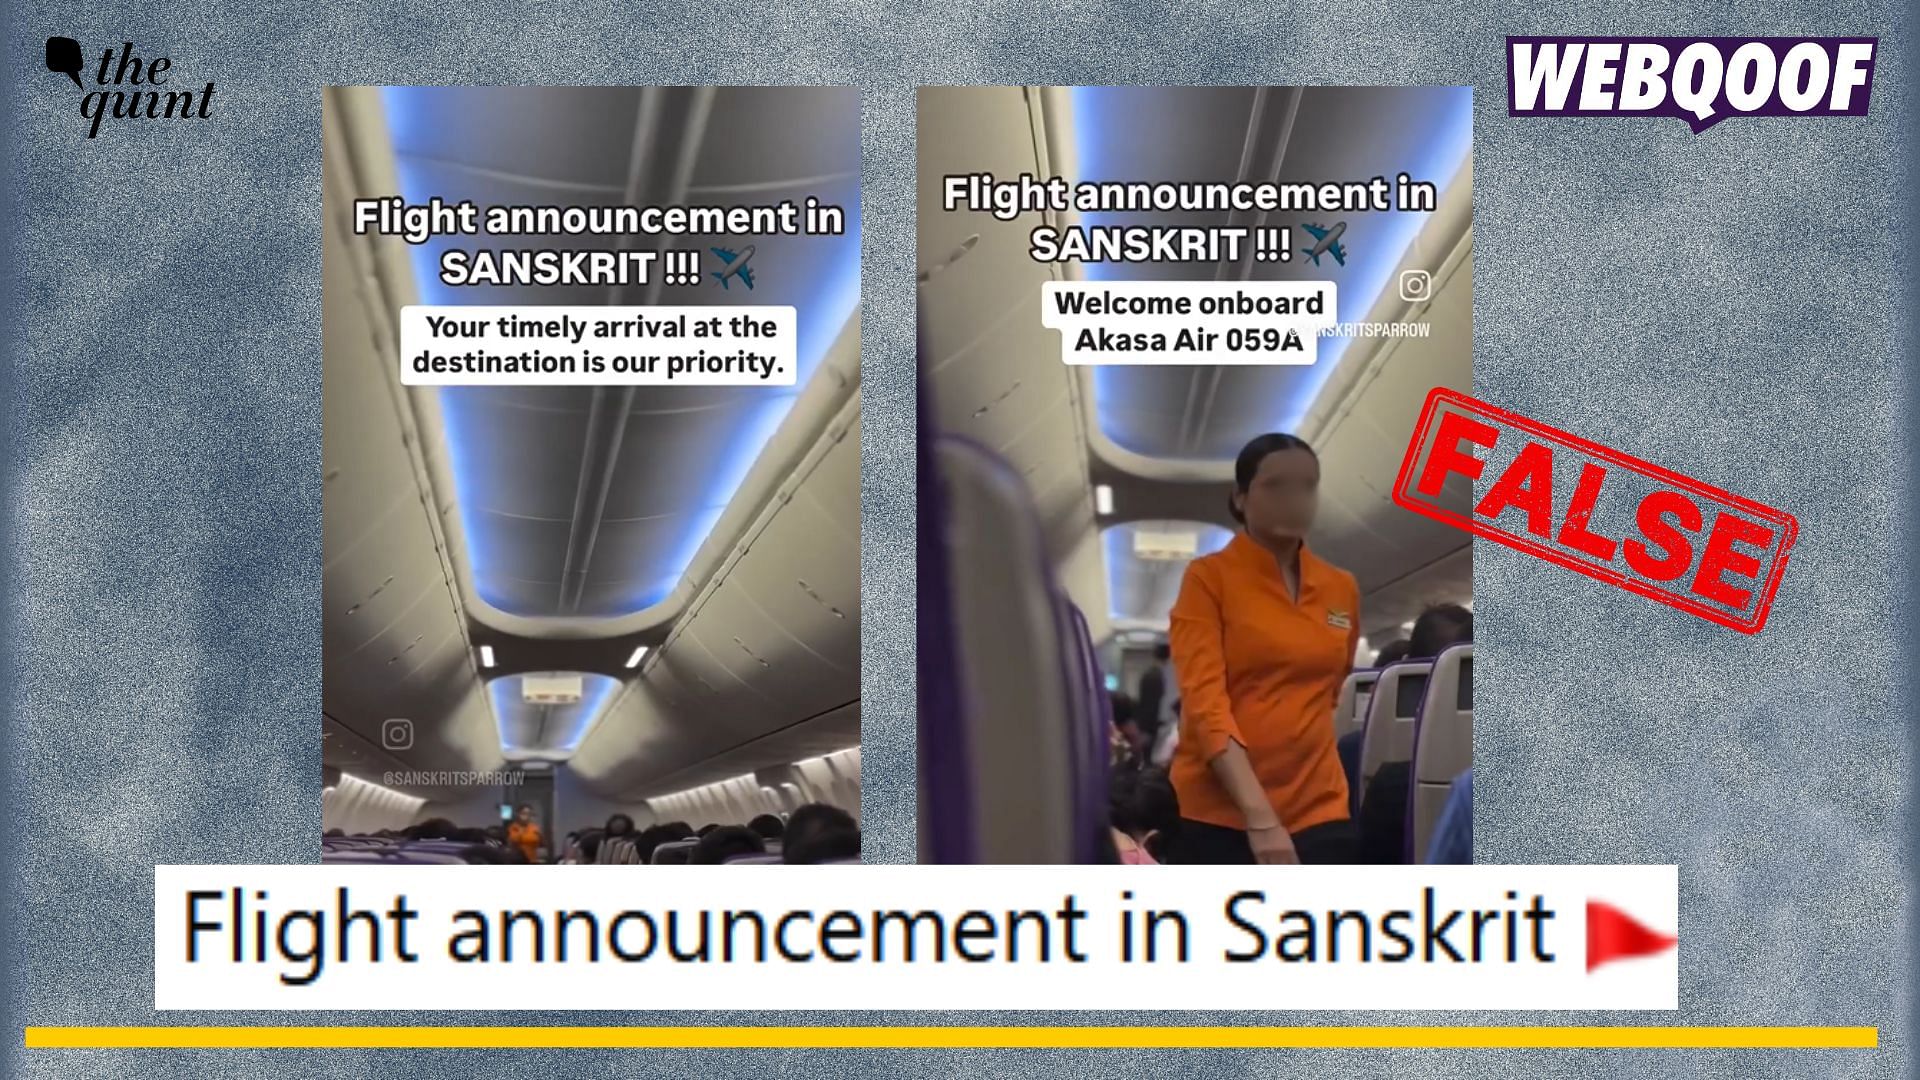 <div class="paragraphs"><p>Fact-check: A dubbed video is going viral online to claim that Akasa Air now delivers their inflight announcements in Sanskrit language.</p></div>